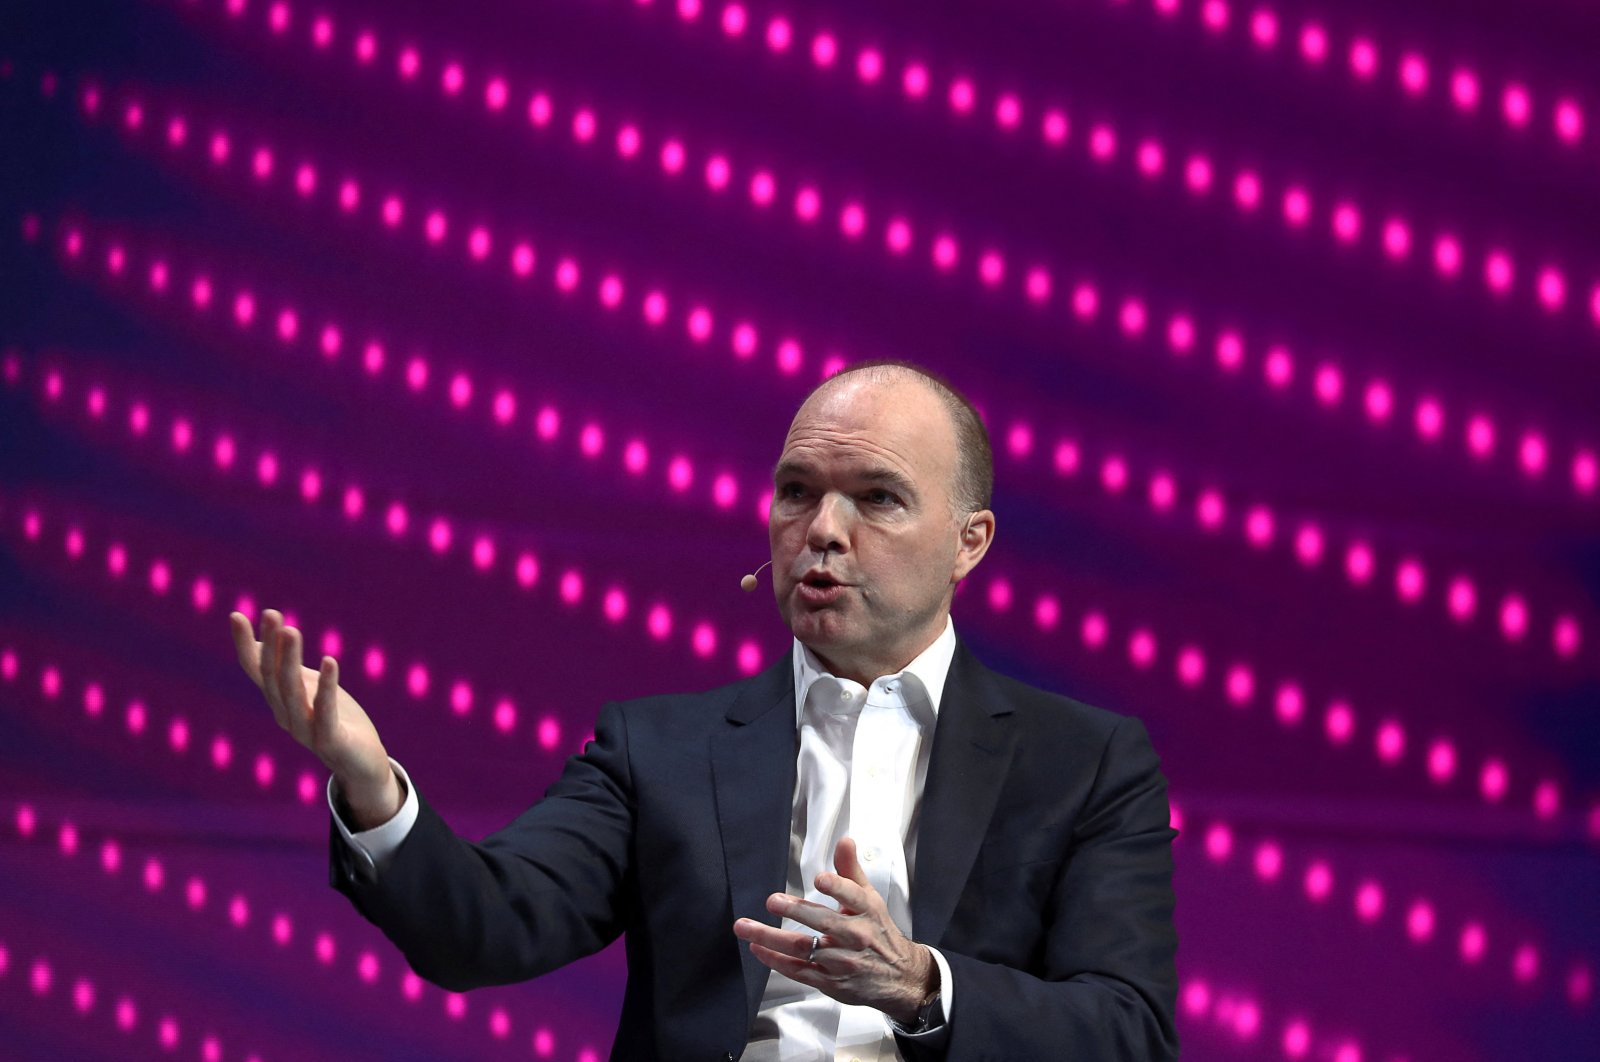 Nick Read, CEO of Vodafone, gestures as he speaks during the Mobile World Congress in Barcelona, Spain, Feb. 25, 2019.  (Reuters Photo)